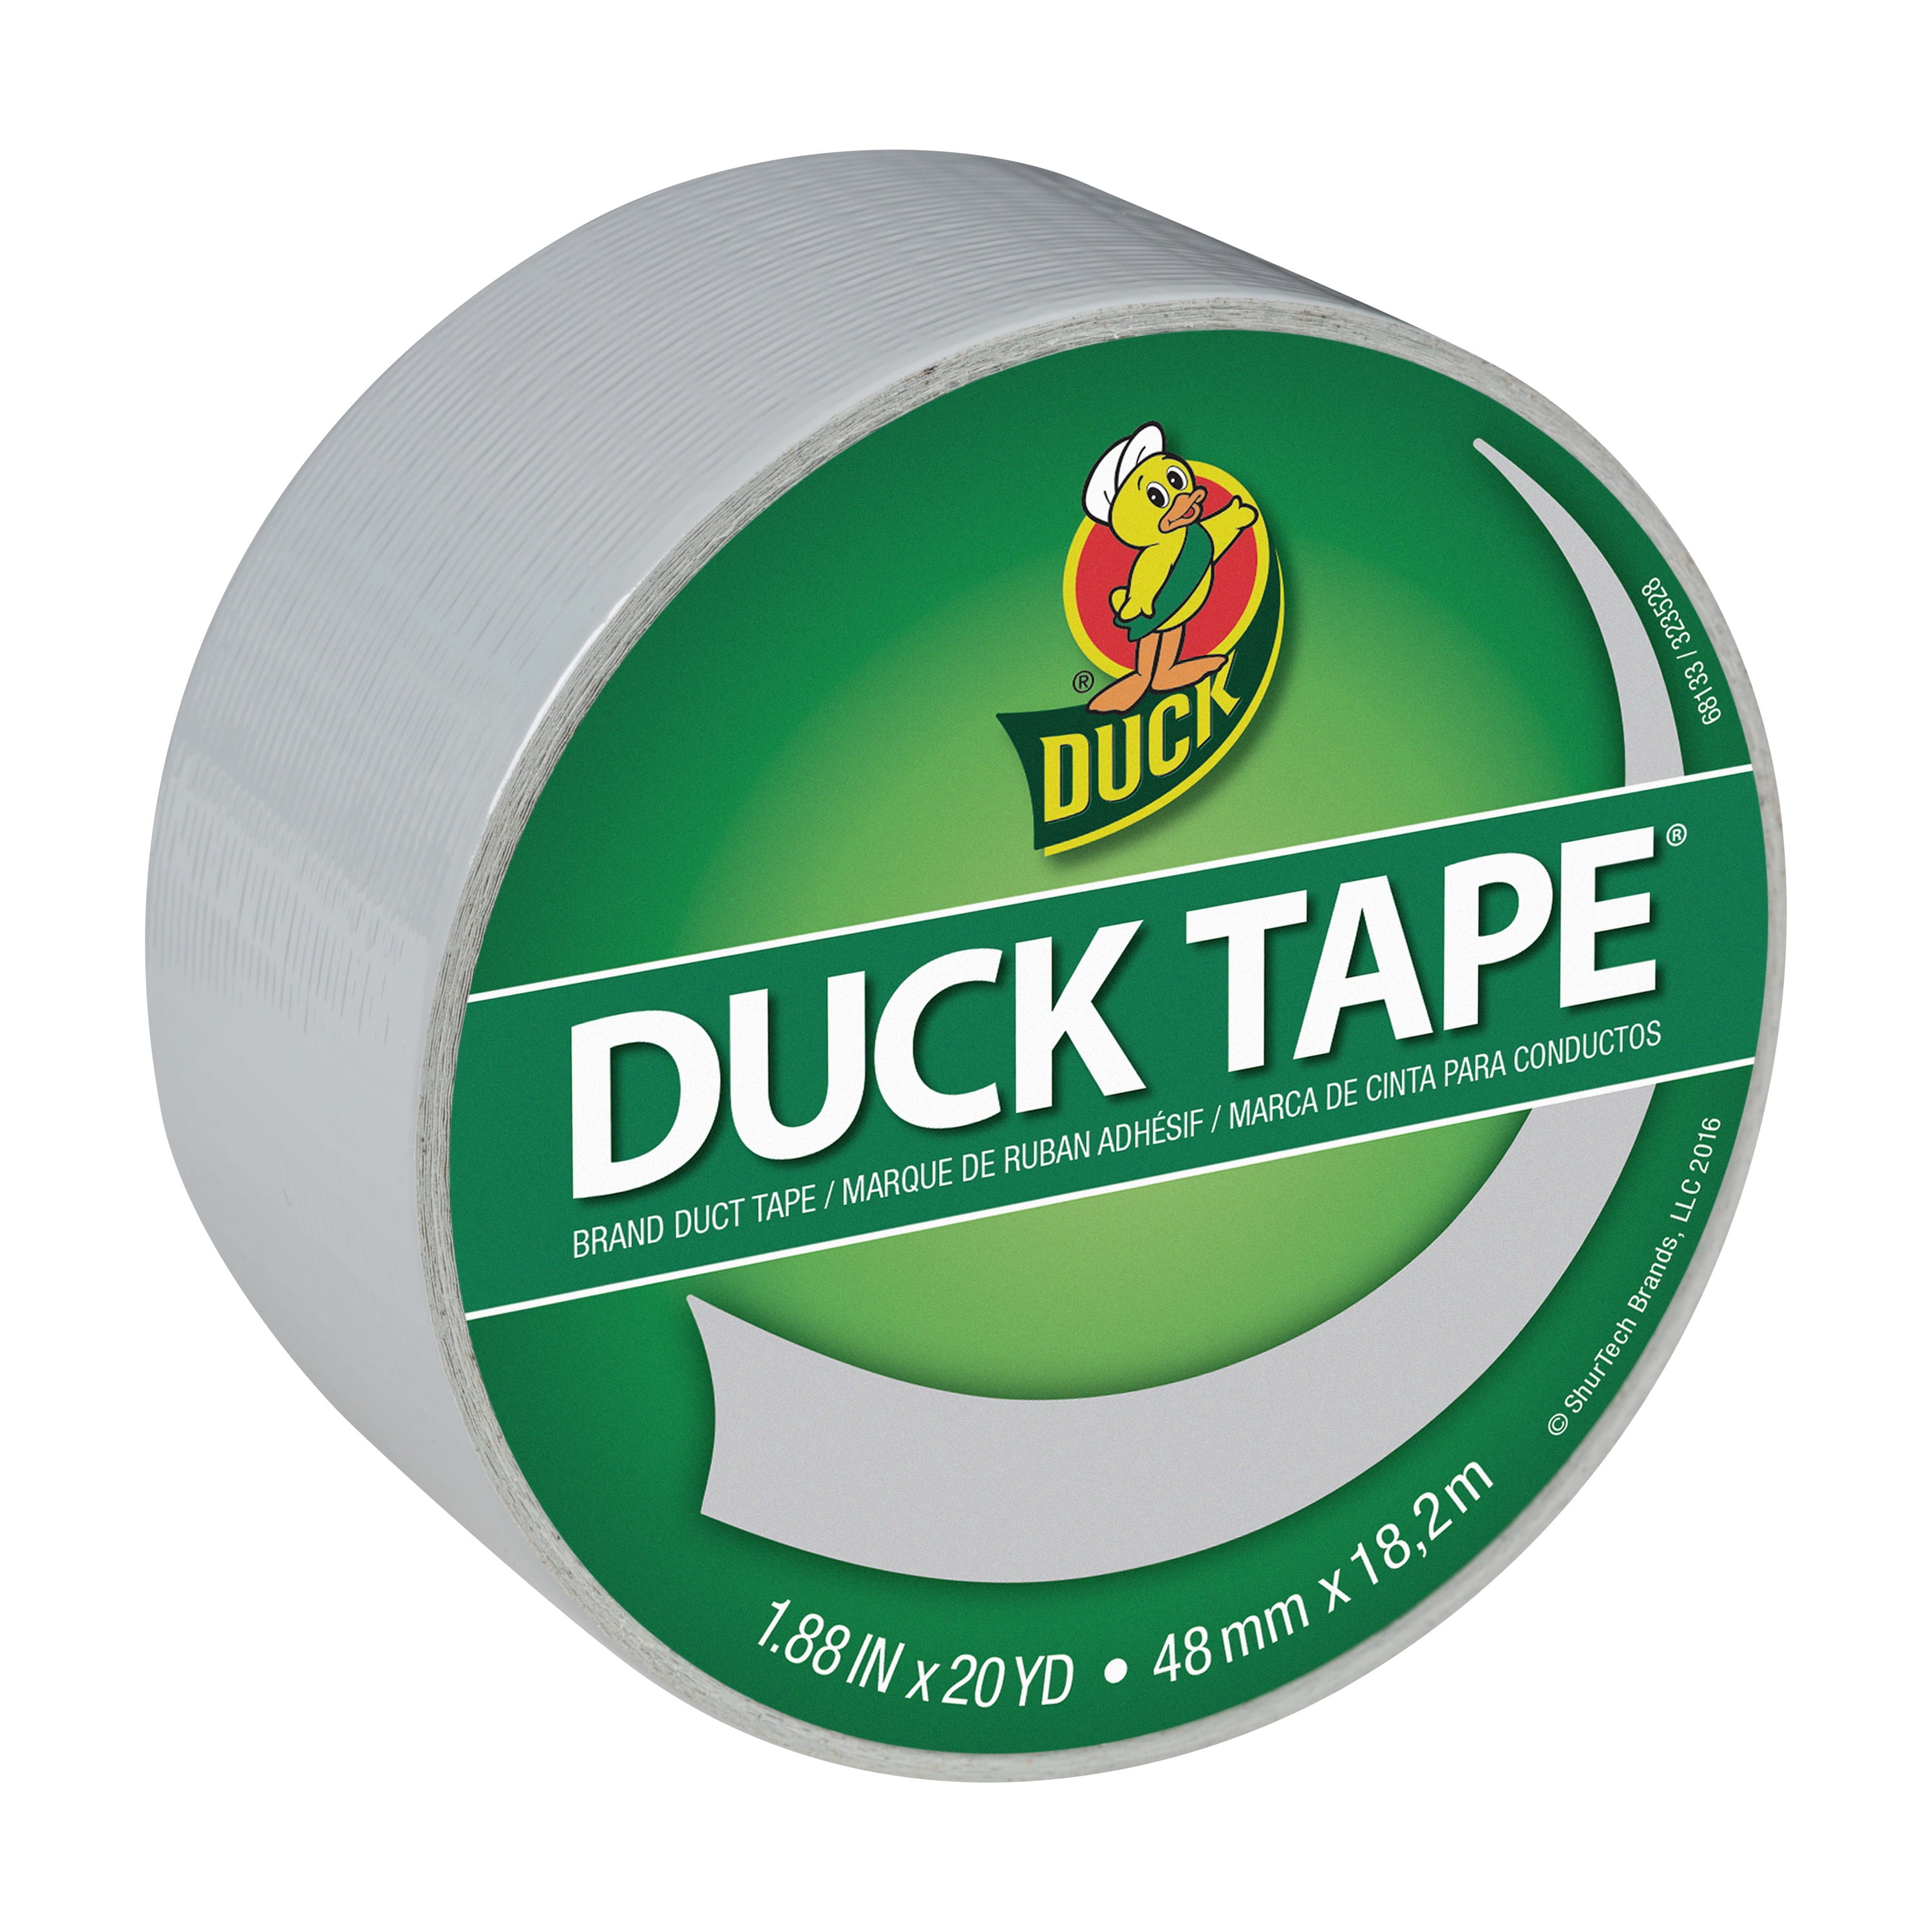 x 20 yd White Colored Duct Tape Duck Brand 1.88 in 